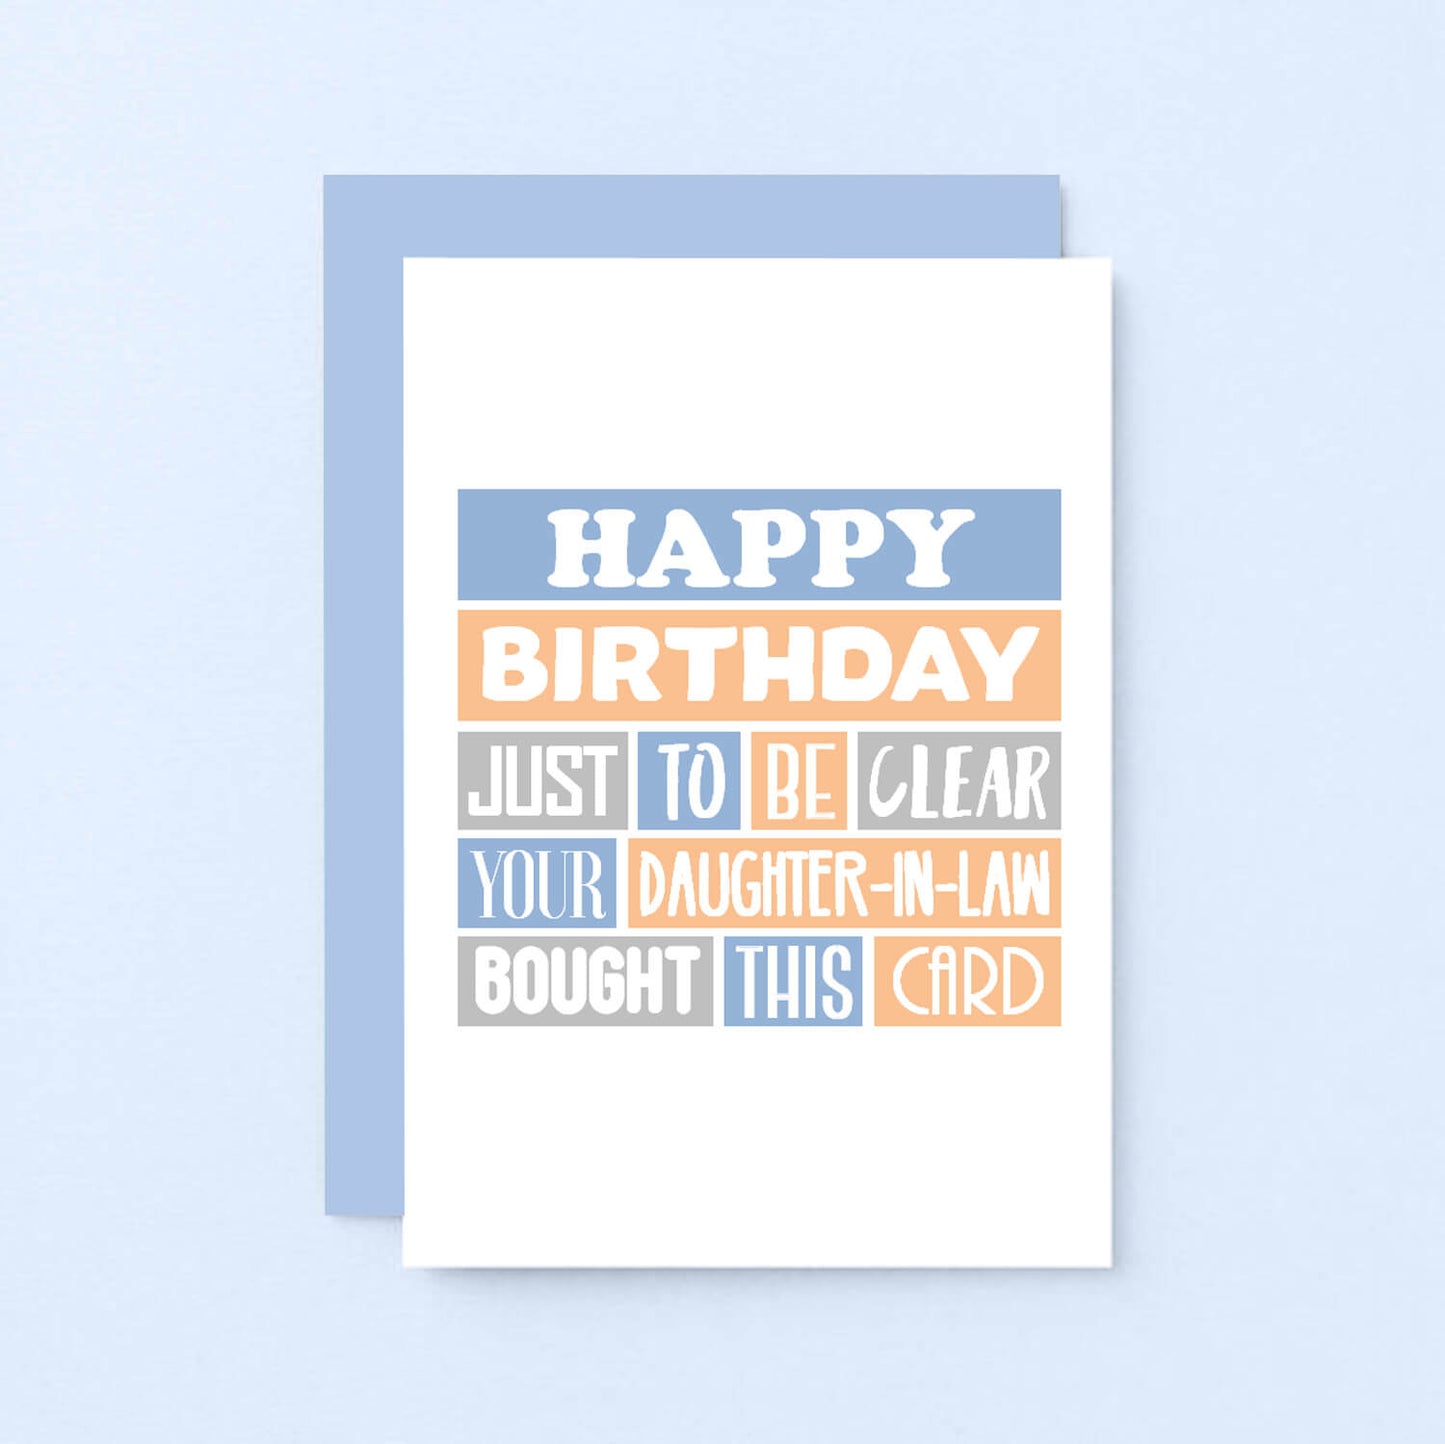 Father-in-Law Birthday Card by SixElevenCreations. Reads Happy birthday. Just to be clear your daughter-in-law bought this card. Product Code SE0205A6